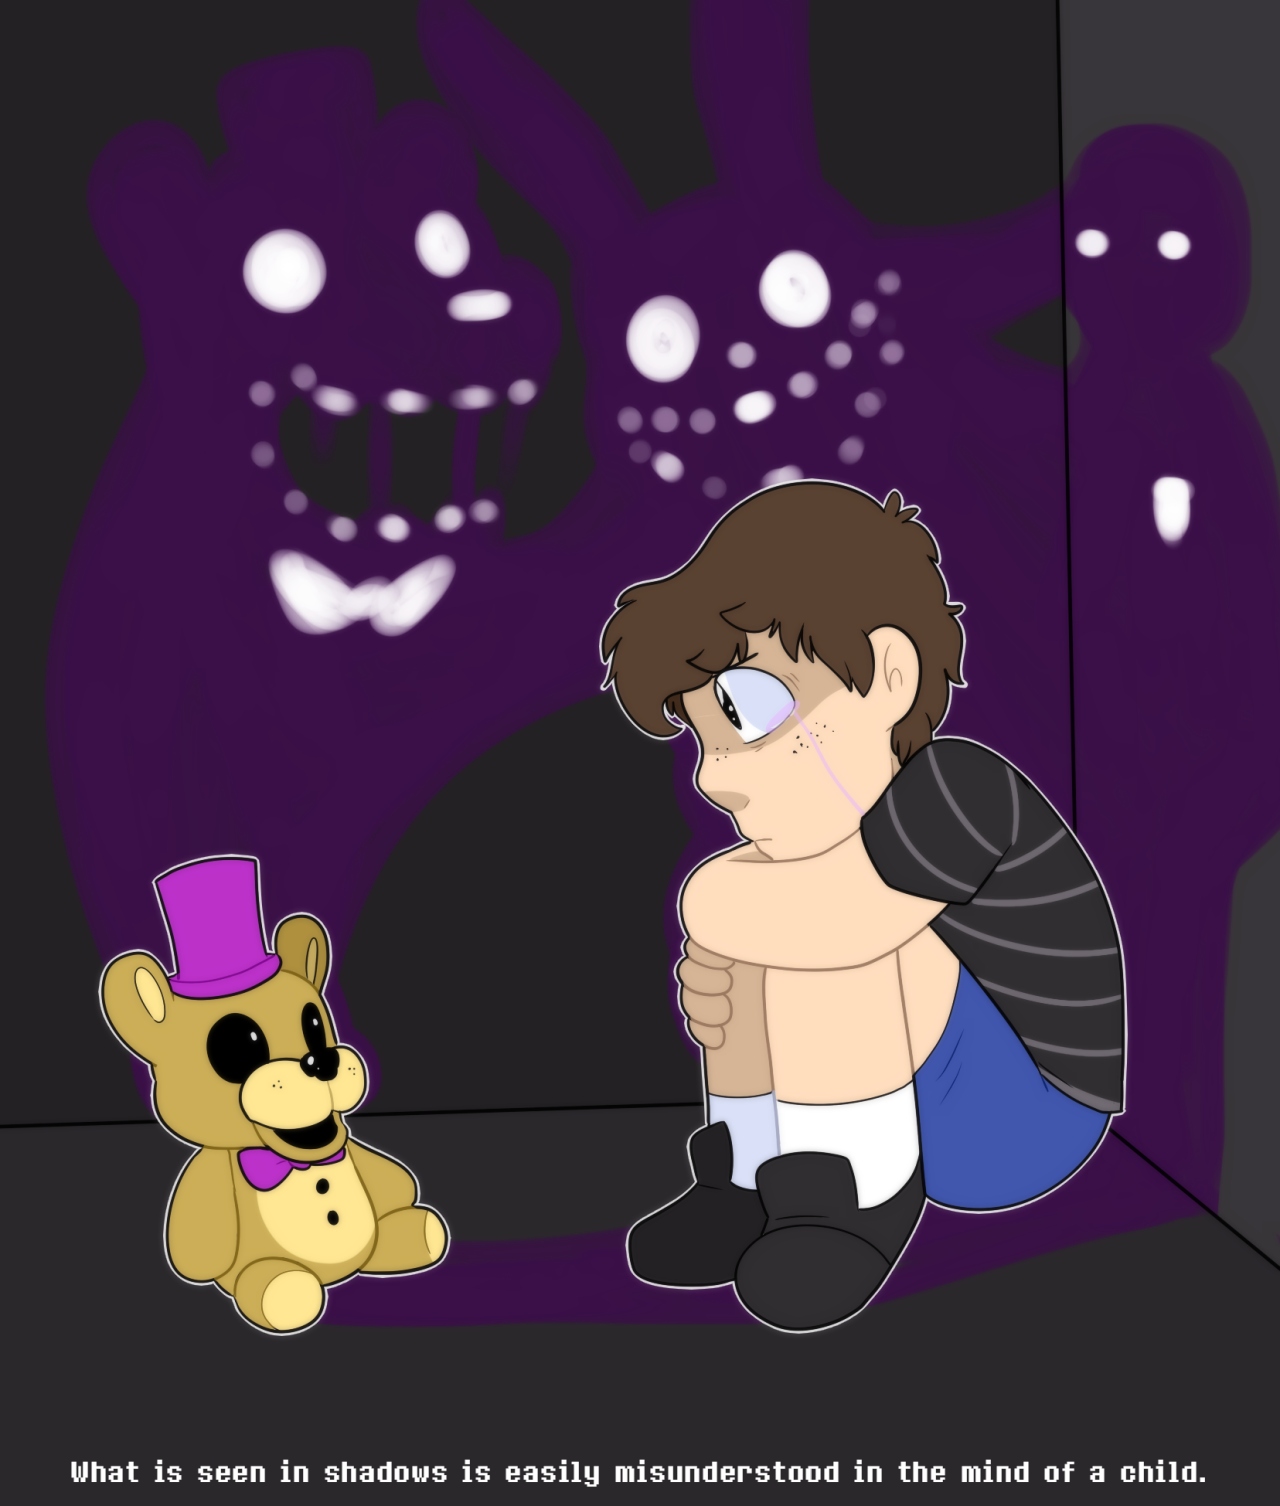 Five Nights at Freddy's 4 - Nightmare Puppet by itsaaudraw on